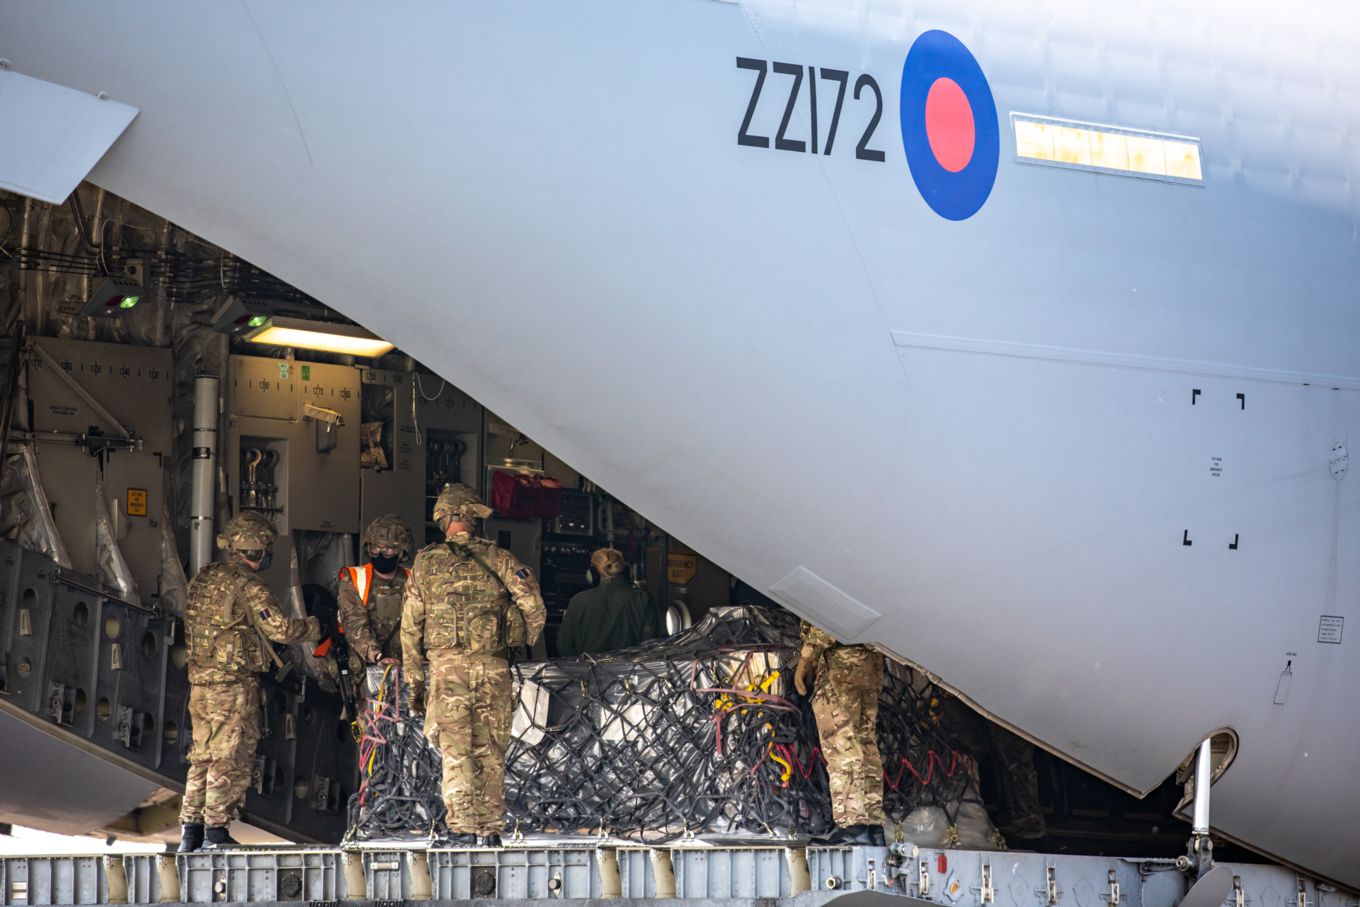 The team from No 1 Air Mobility Wing loading humanitarian cargo onto a C-17 Globemaster.